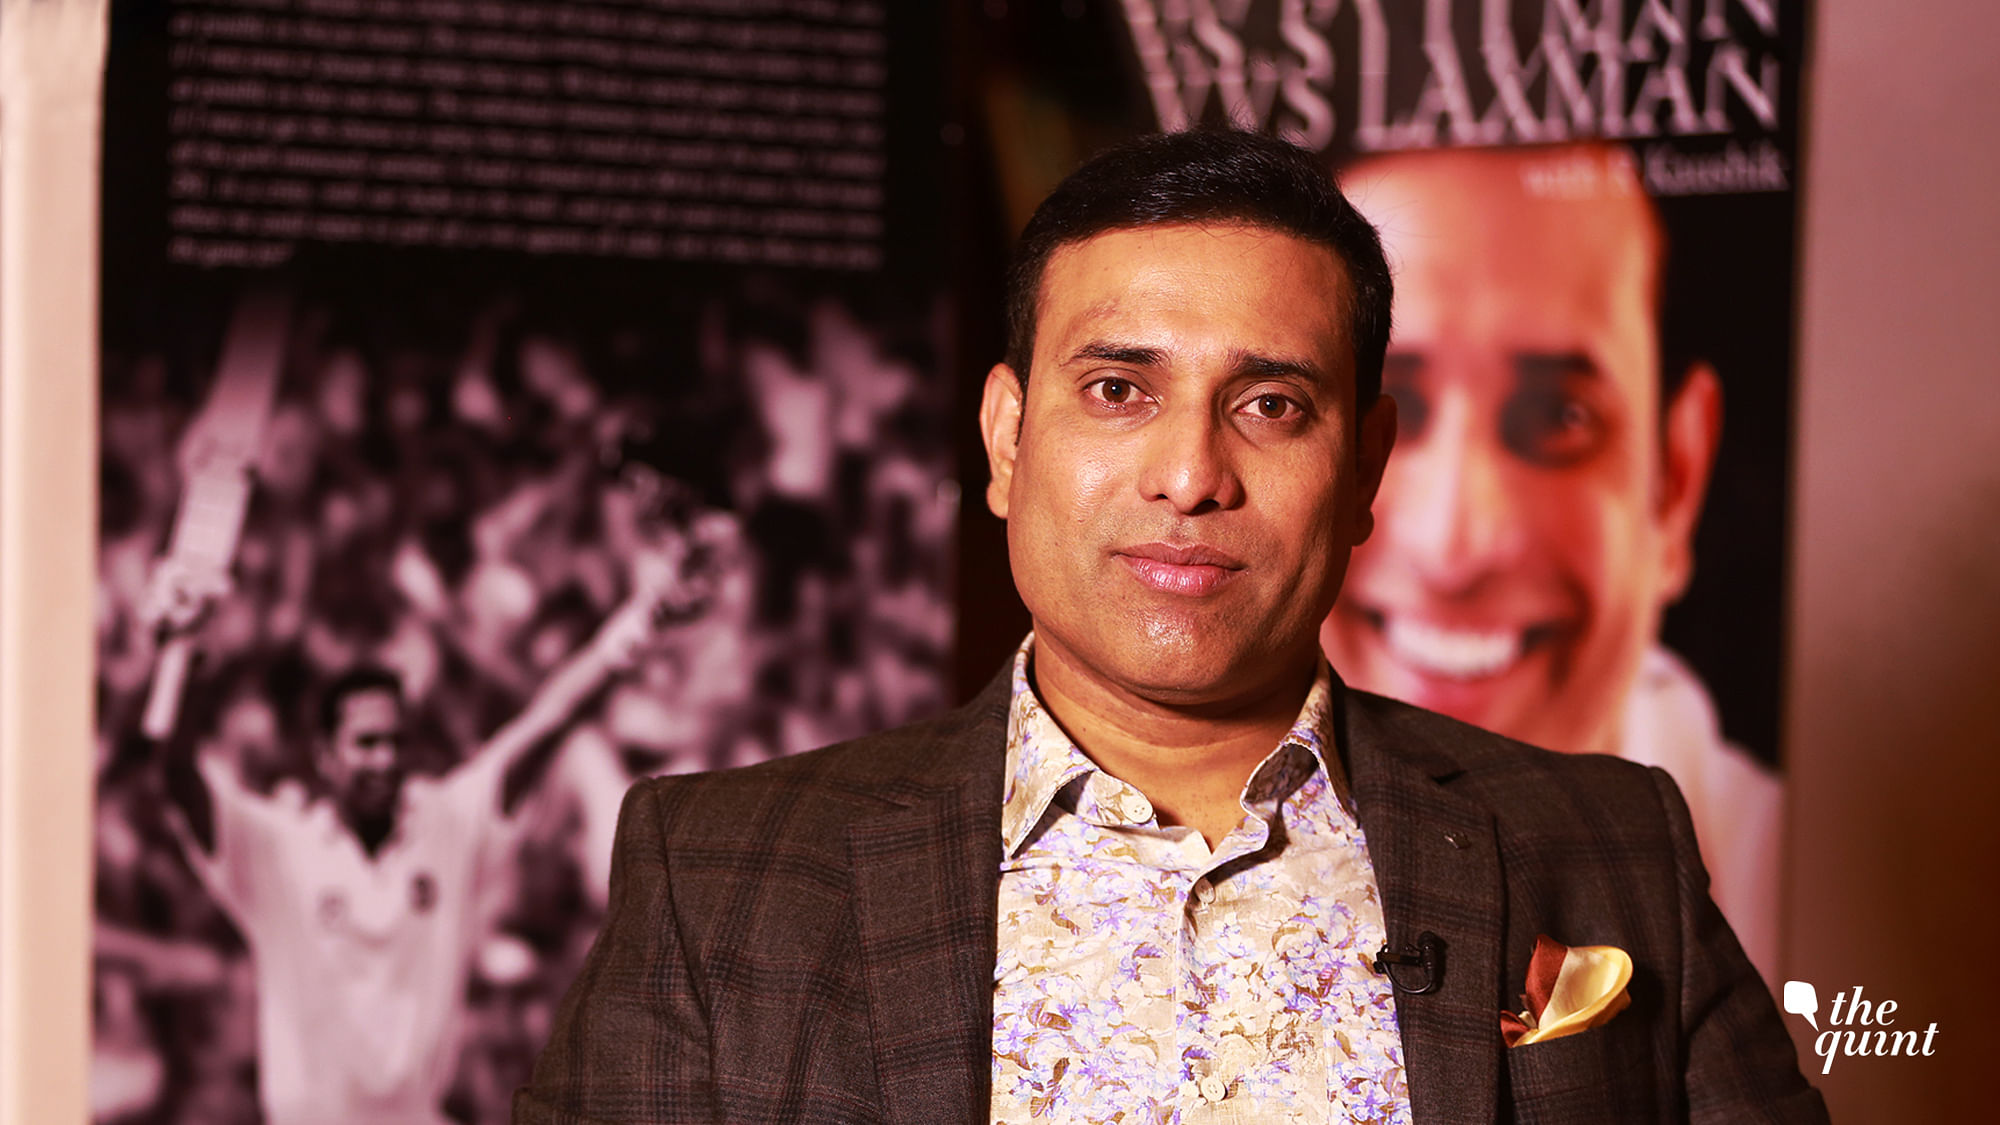 At the launch of his autobiography ‘281 and beyond’, former India cricketer VVS Laxman talks about the innings that no one can ever forget.